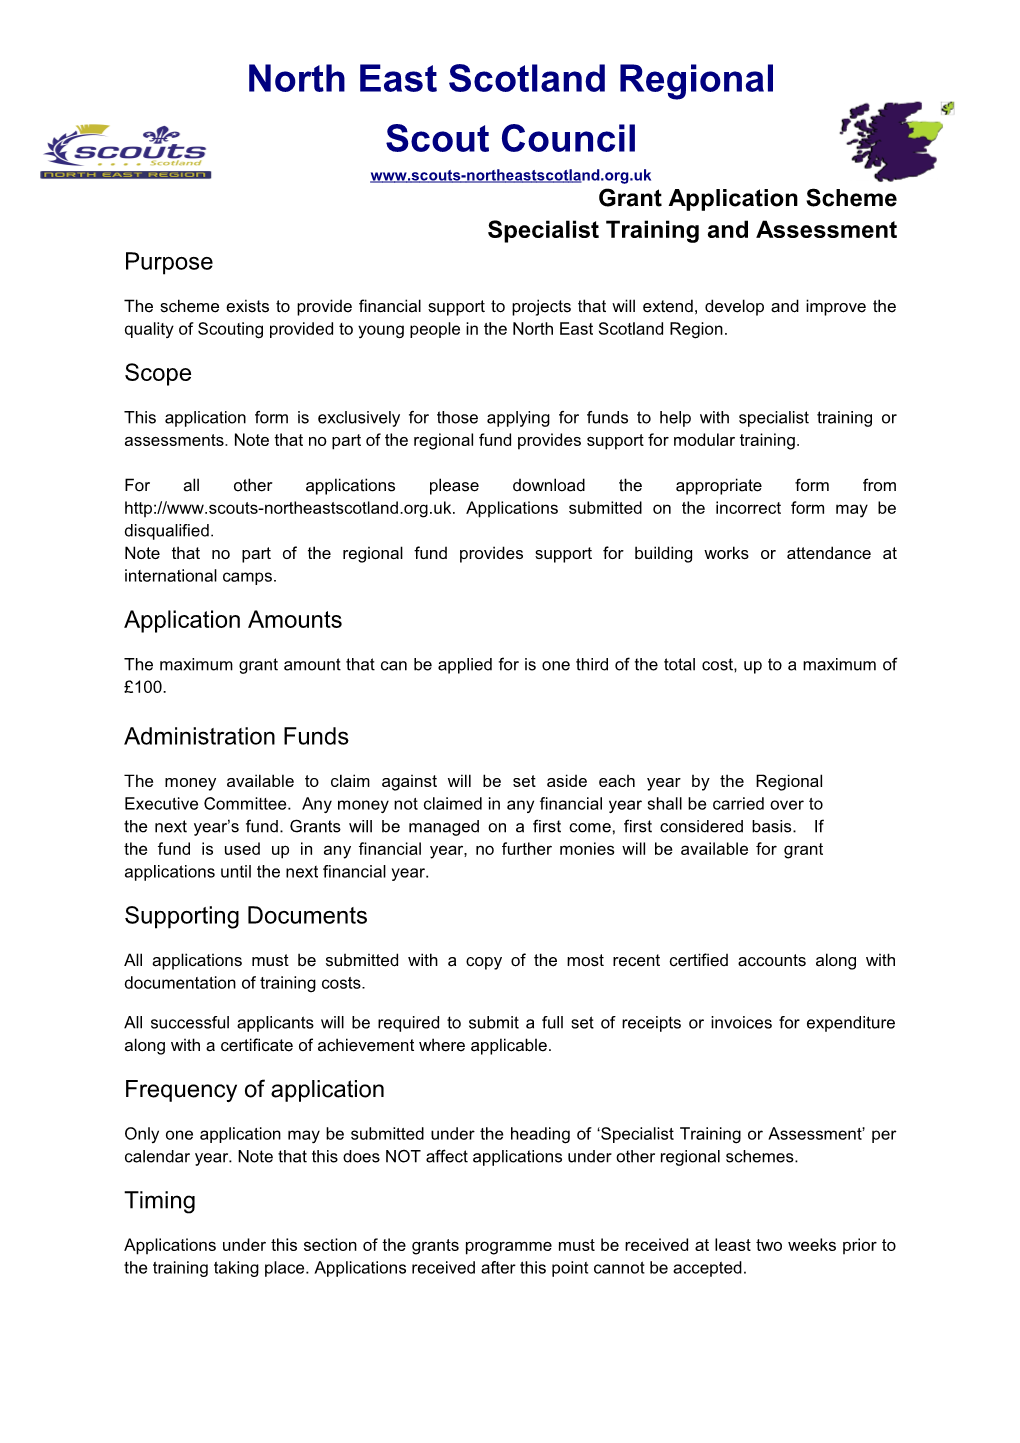 Specialist Training and Assessment